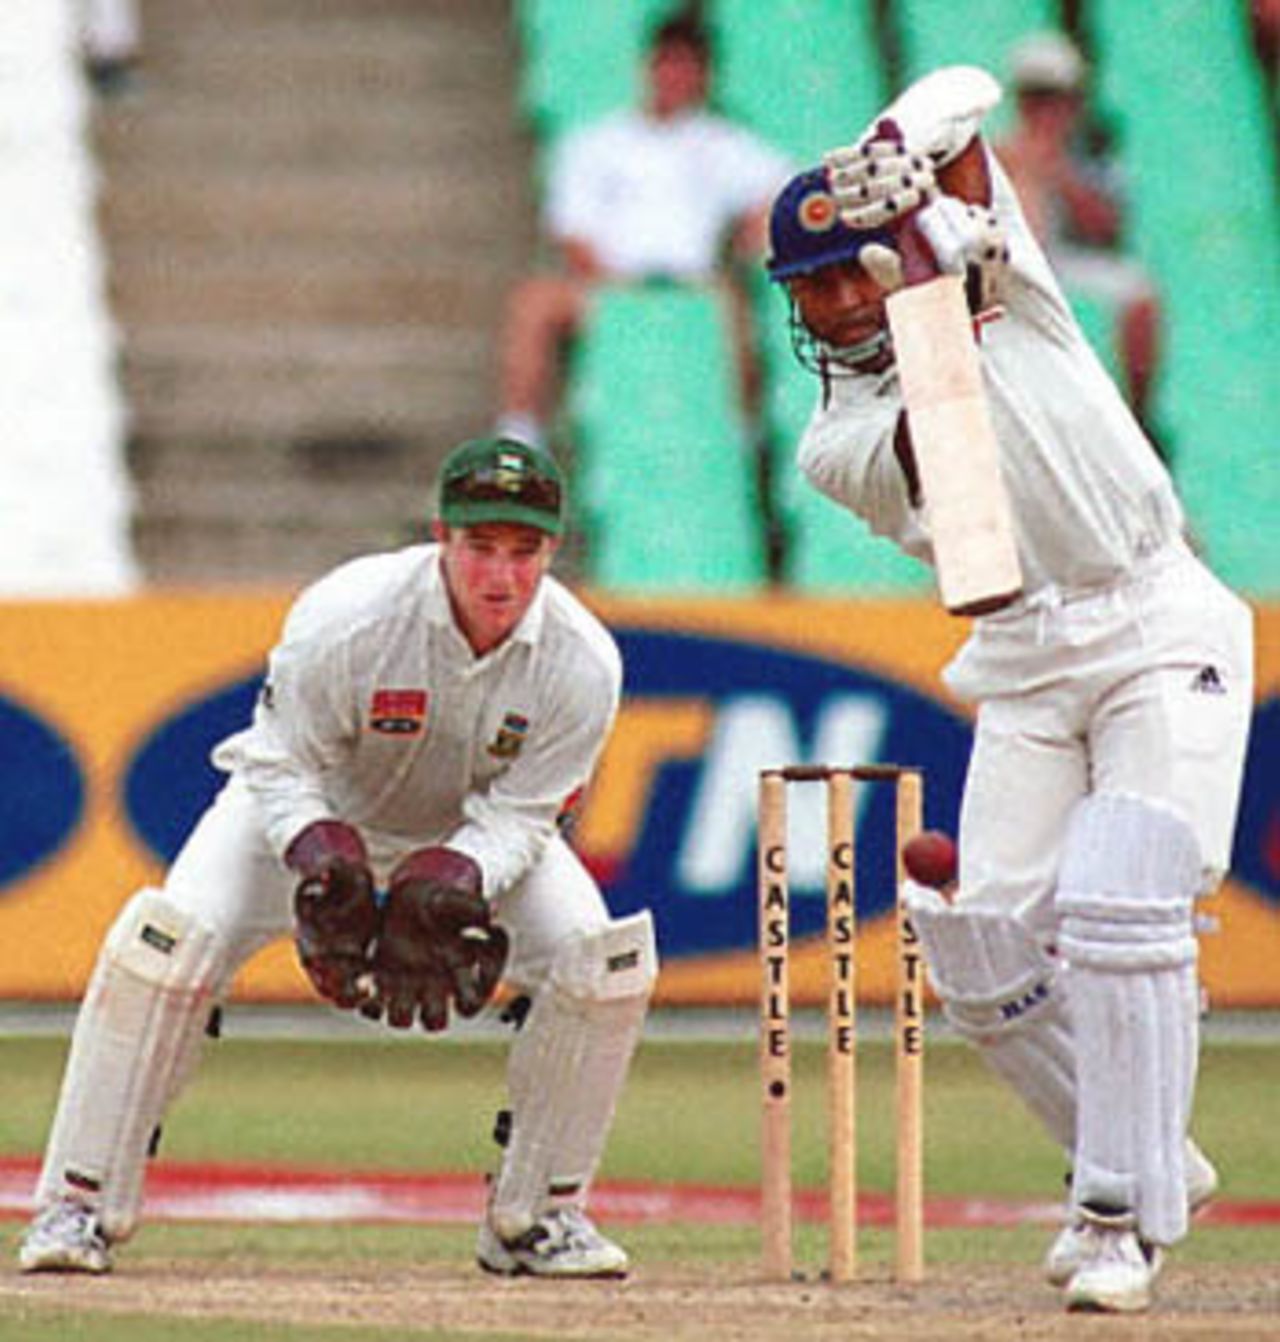 Sri Lankan batsman Romesh Kaluwitharana plays a cover drive at Durban's Kingsmead cricket grounds, 28 December 2000, during the third day of the first Test match between South Africa and Sri Lanka. Looking on is South African wicket-keeper Mark Boucher.